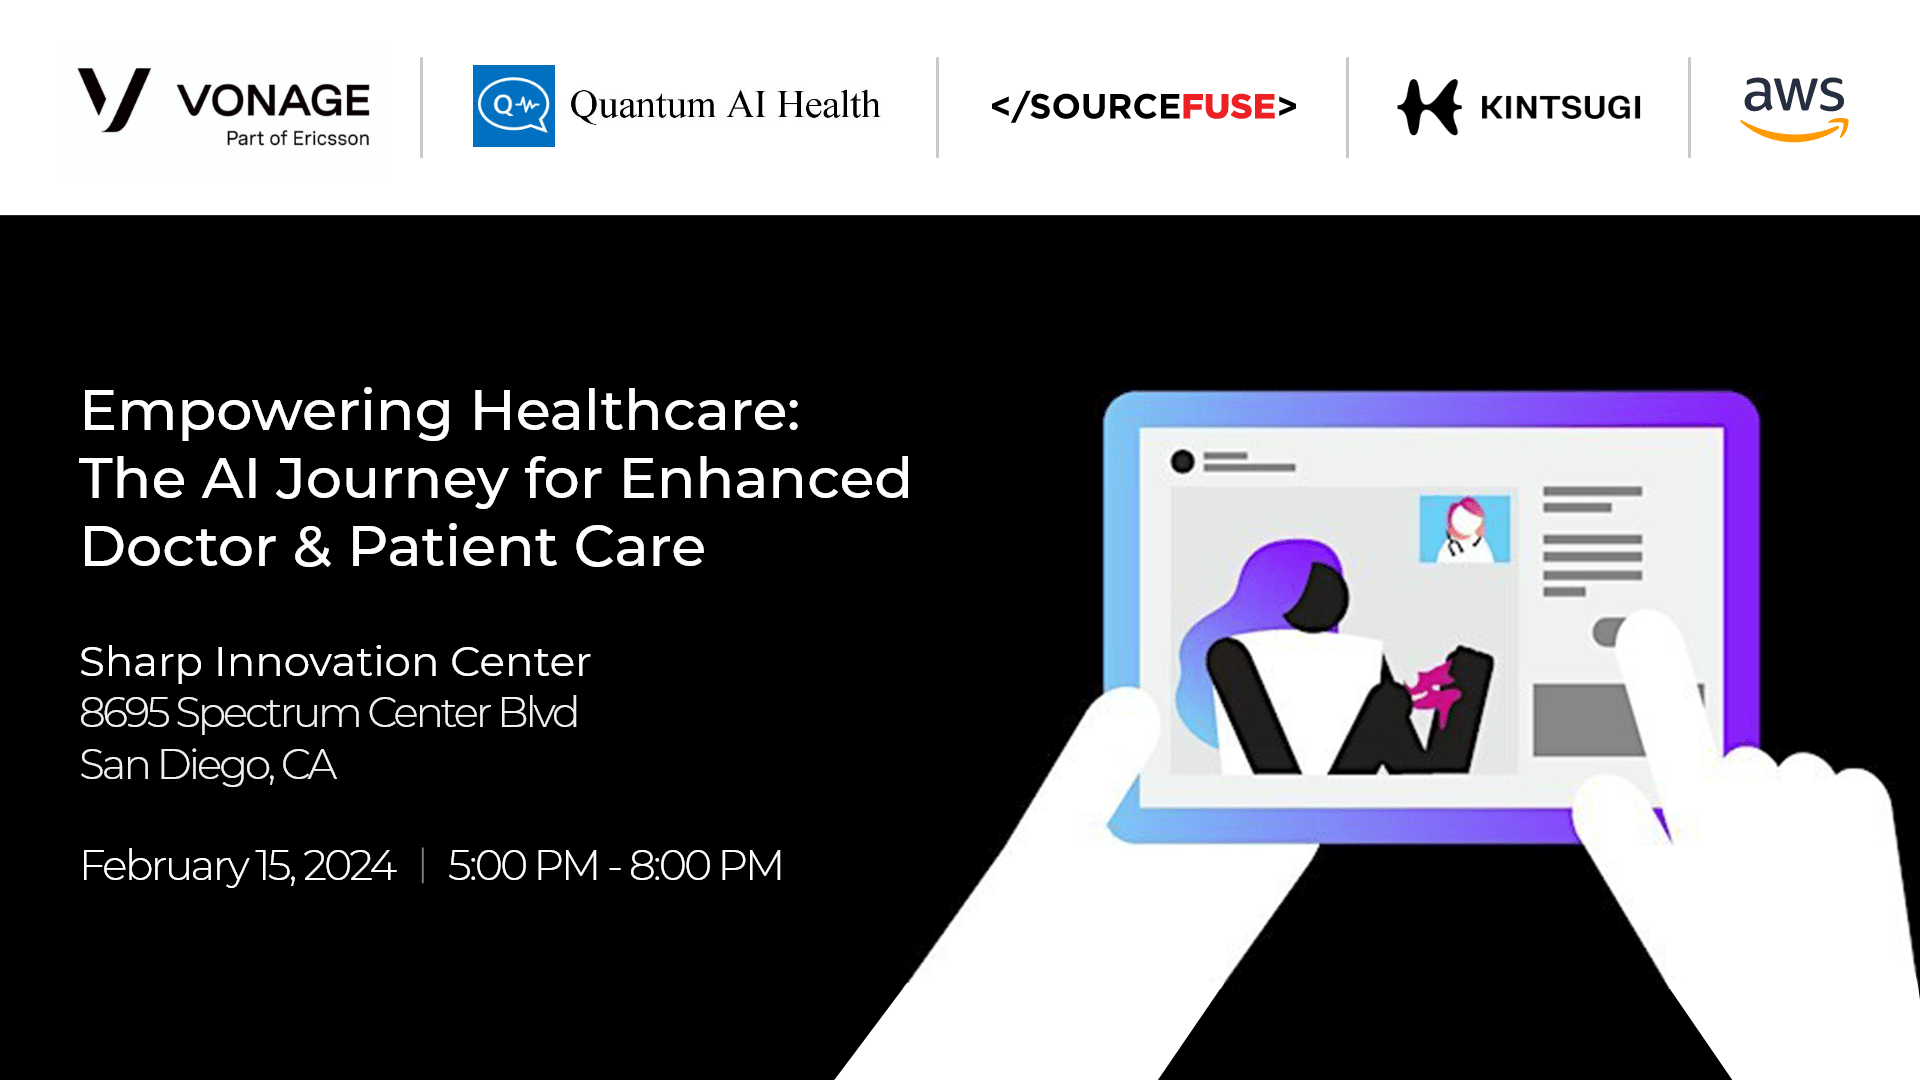 Empowering Healthcare: The AI Journey for Enhanced Doctor & Patient Care